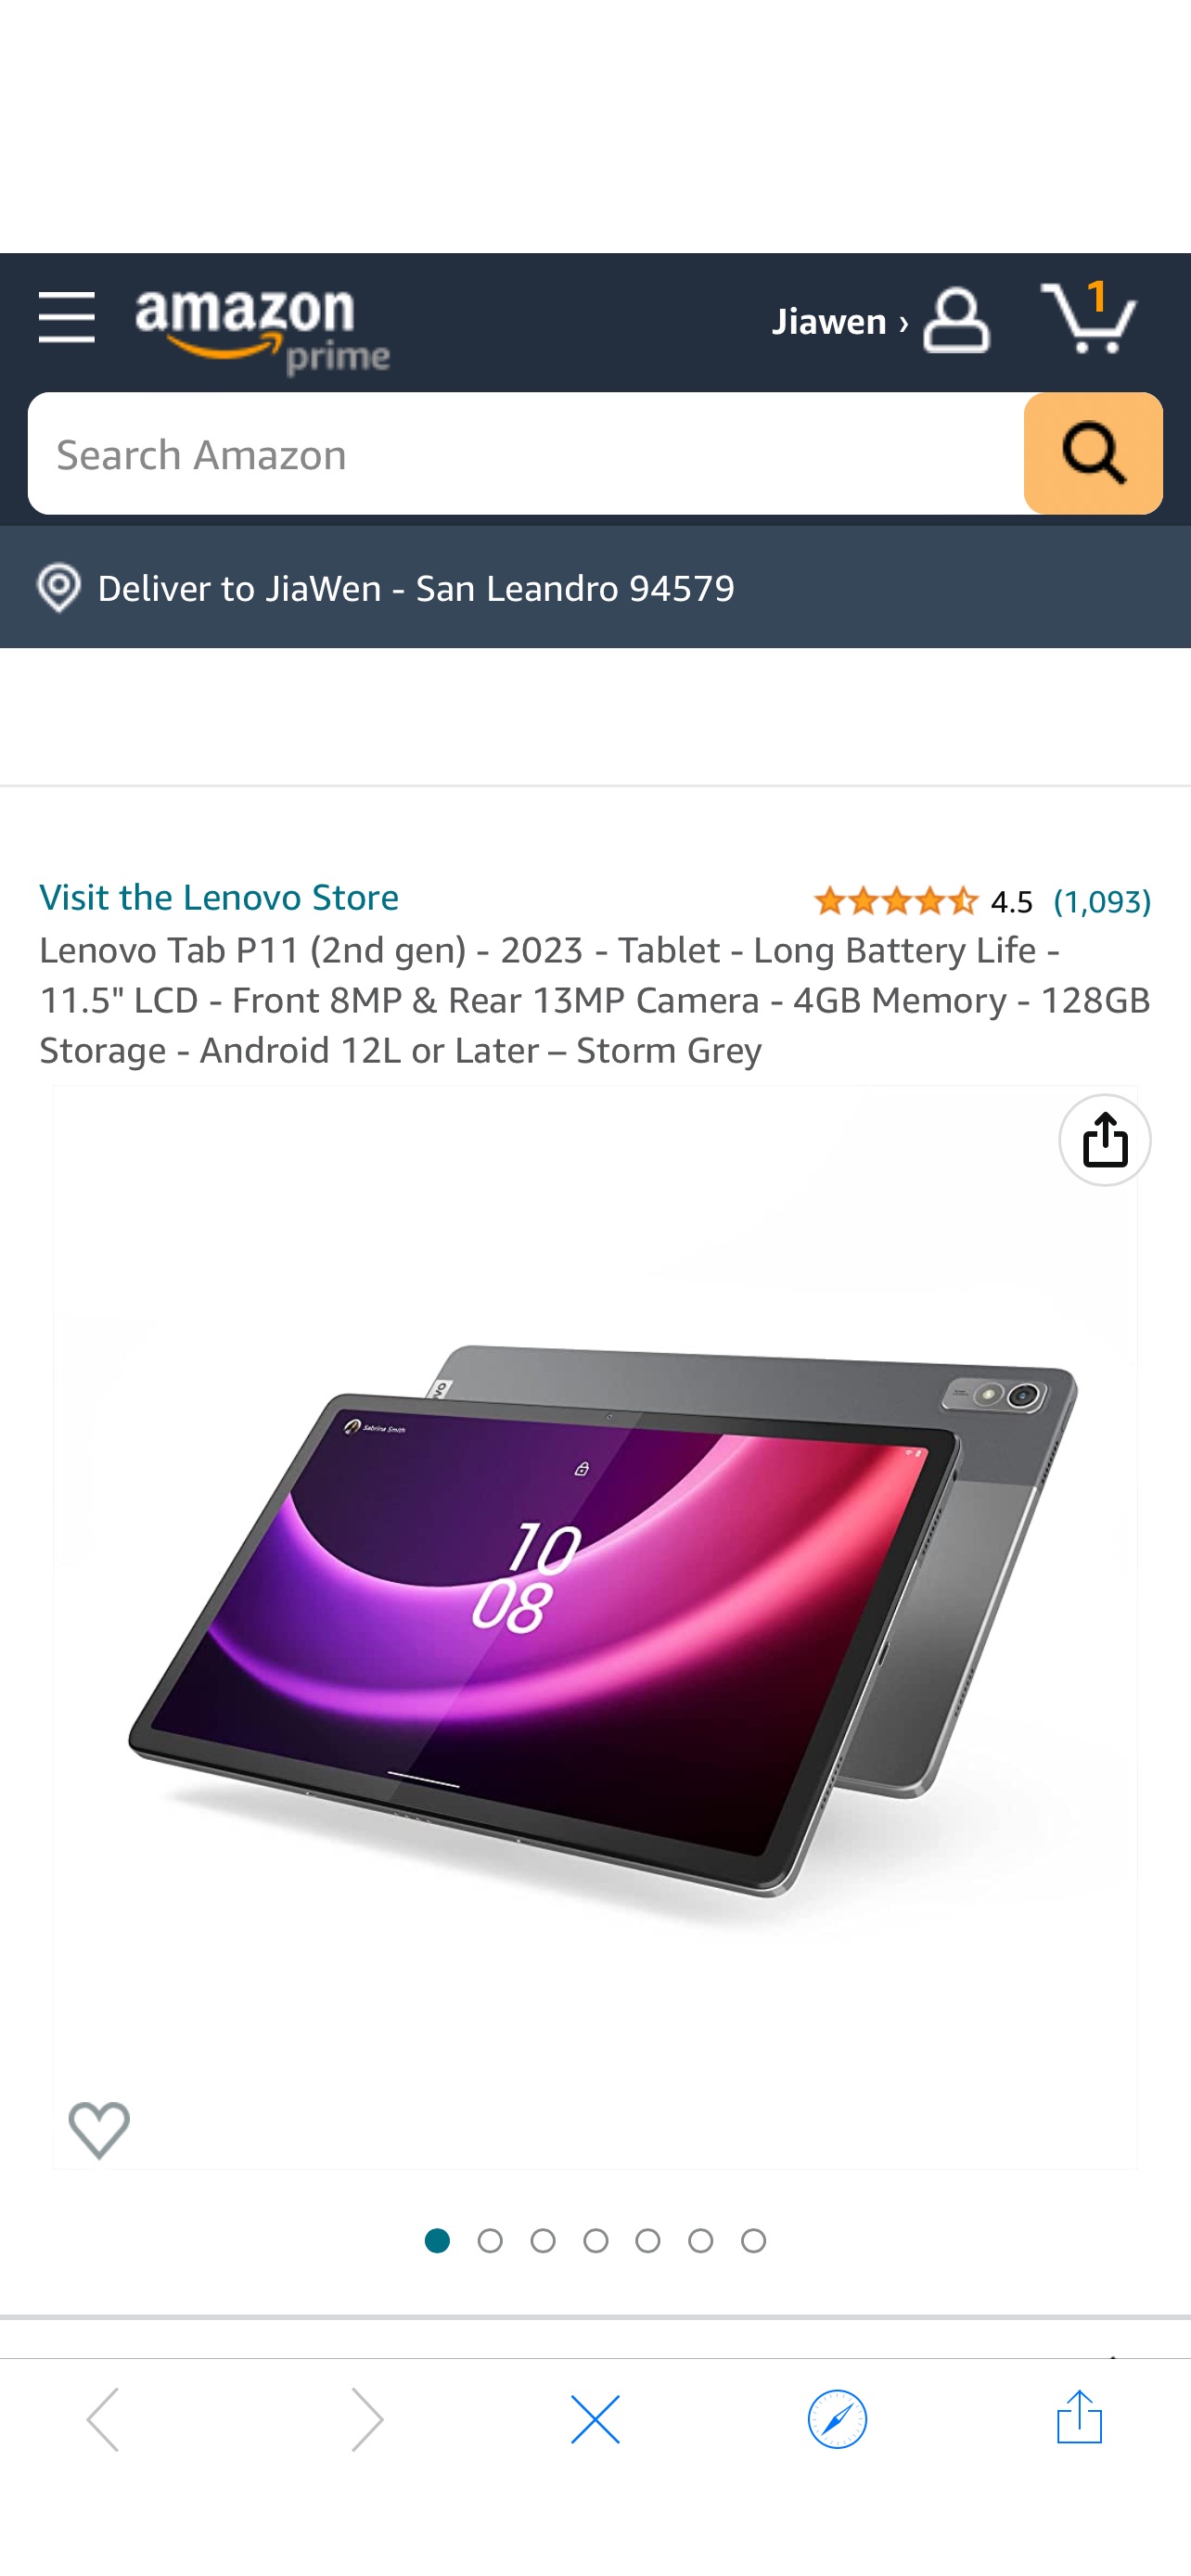 Amazon.com : Lenovo Tab P11 (2nd gen) - 2023 - Tablet - Long Battery Life - 11.5" LCD - Front 8MP & Rear 13MP Camera - 4GB Memory - 128GB Storage - Android 12L or Later – Storm Grey : Electronics